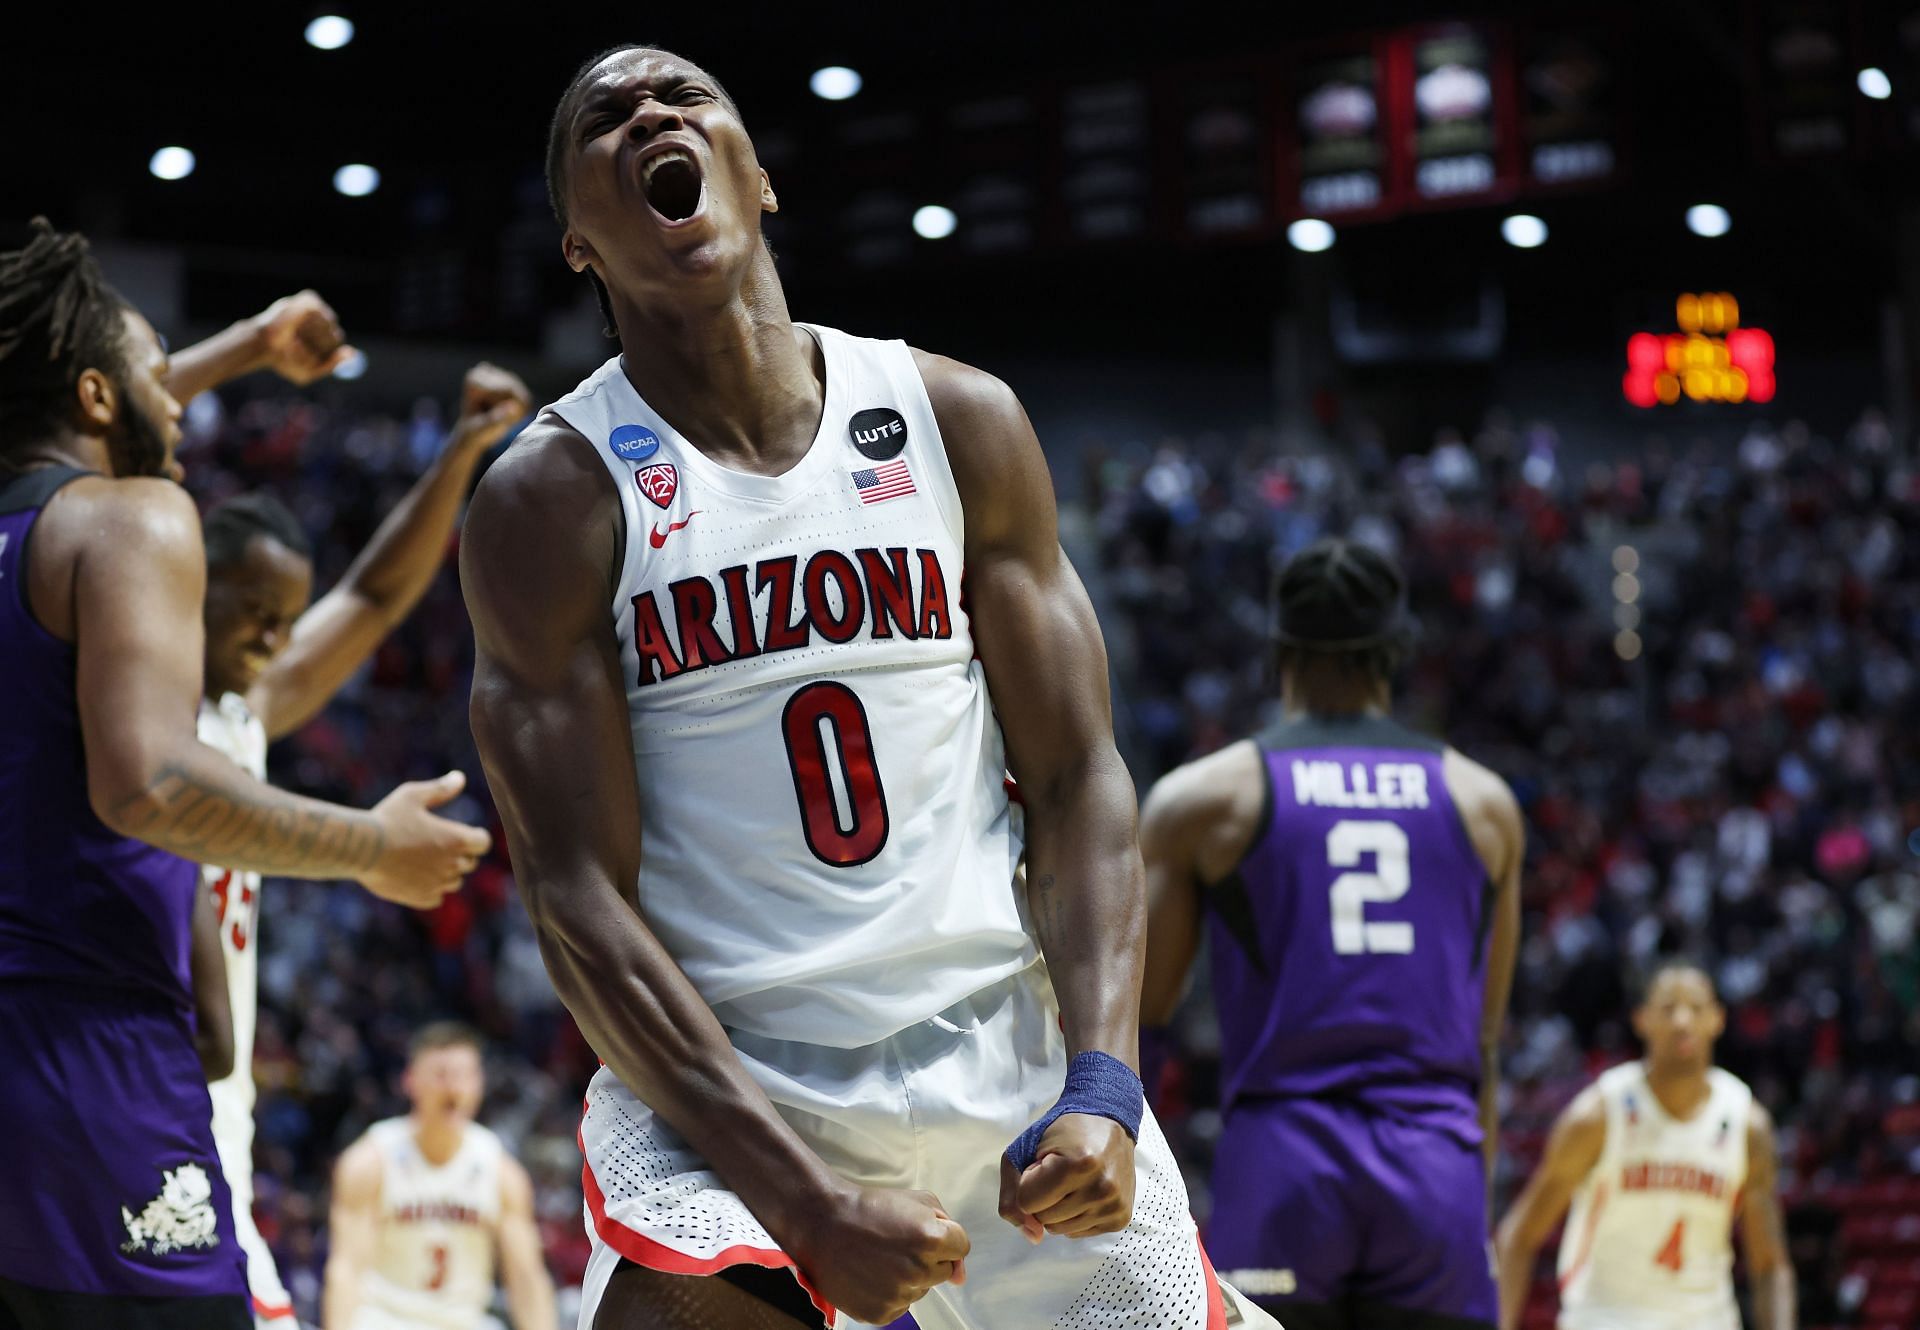 Bennedict Mathurin could be the pick for Trail Blazers if they decide to go small forward.